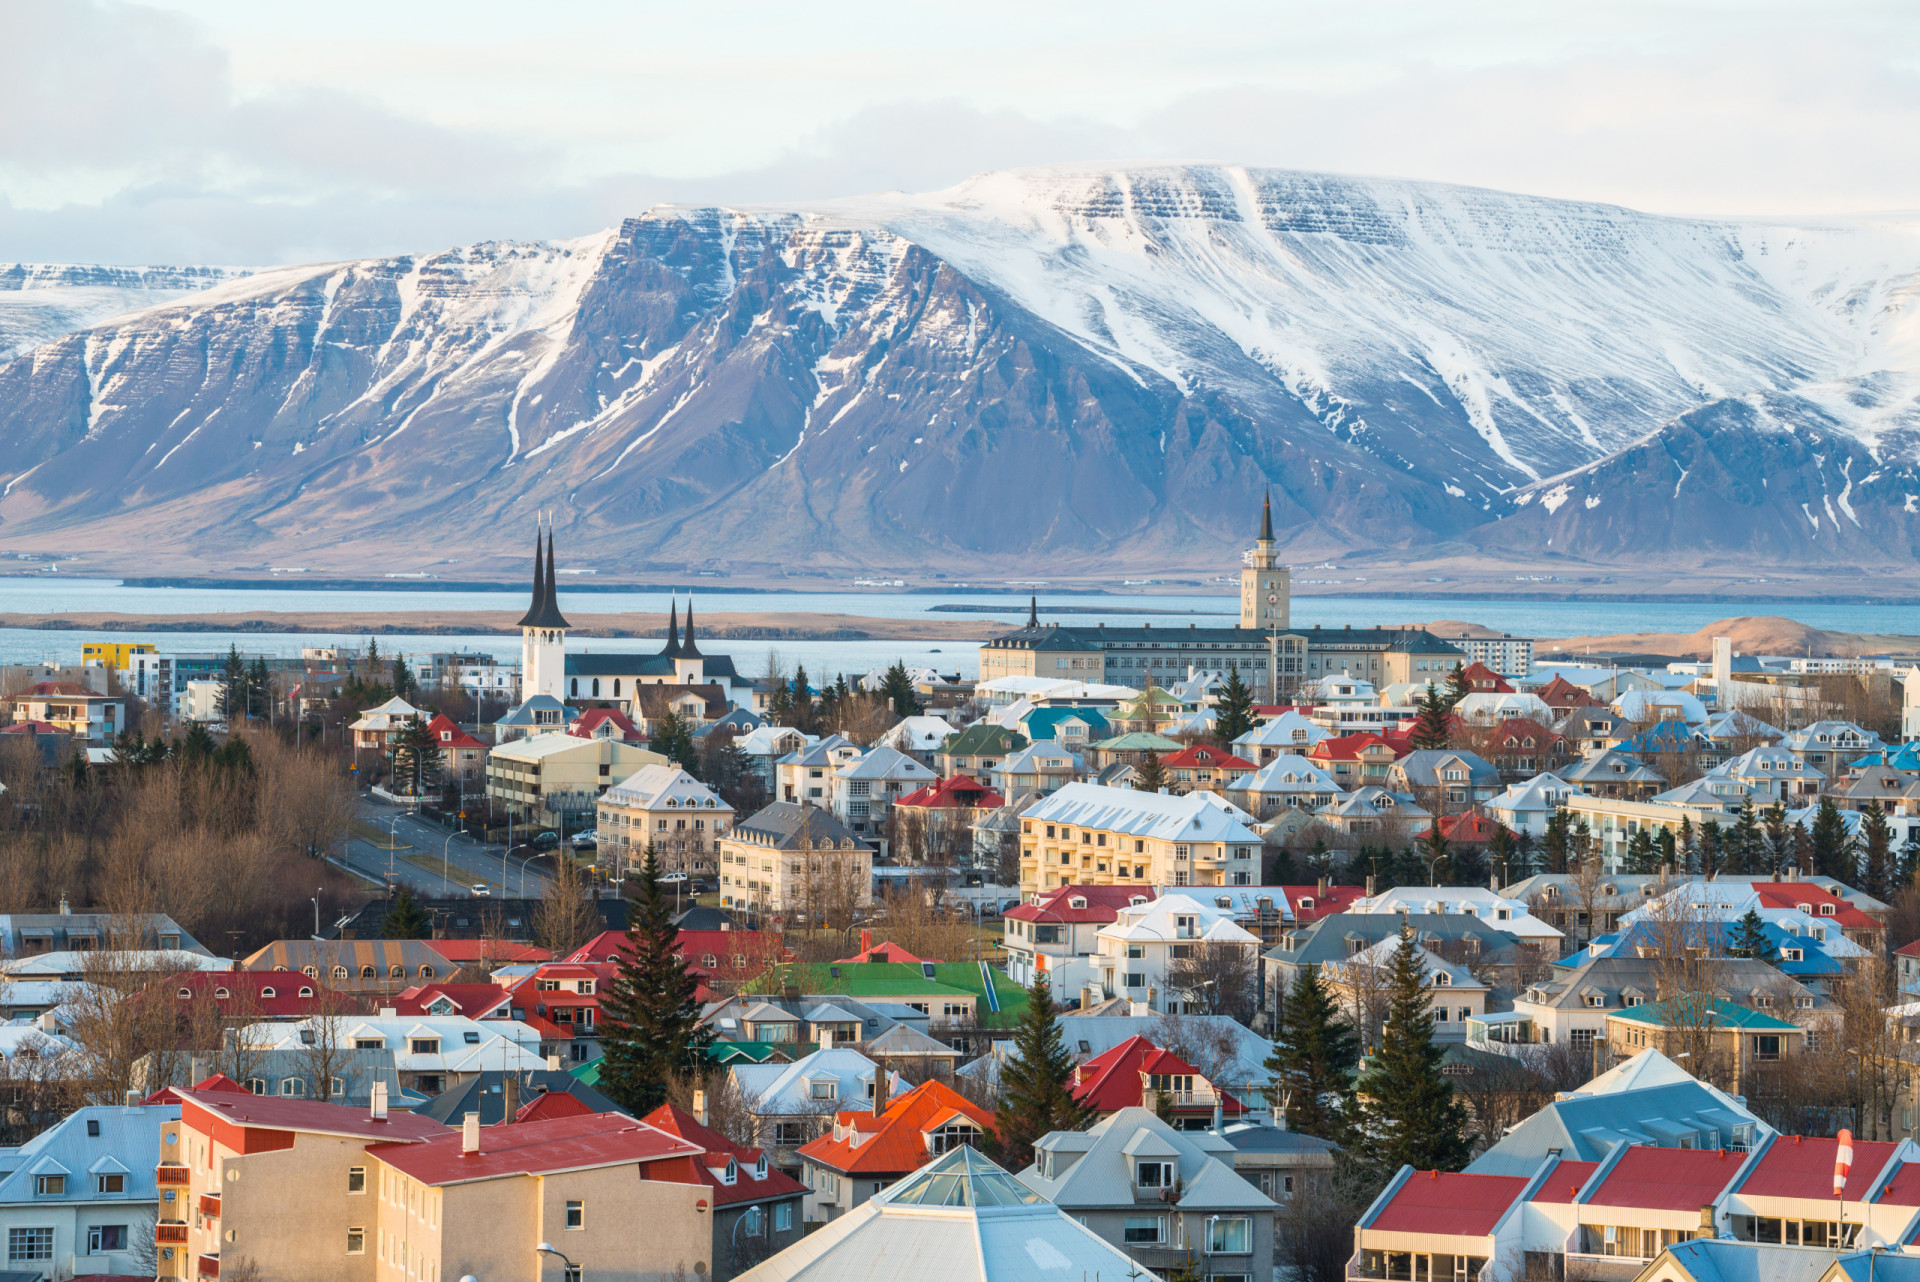 <p>Since January 2024, Iceland has reinstated their tourist tax, which costs US$4.36 per night. It comes after annual tourist numbers reached an estimated 2.3 million per year.</p><p><a href="https://www.msn.com/en-ph/community/channel/vid-7xx8mnucu55yw63we9va2gwr7uihbxwc68fxqp25x6tg4ftibpra?cvid=94631541bc0f4f89bfd59158d696ad7e">Follow us and access great exclusive content every day</a></p>